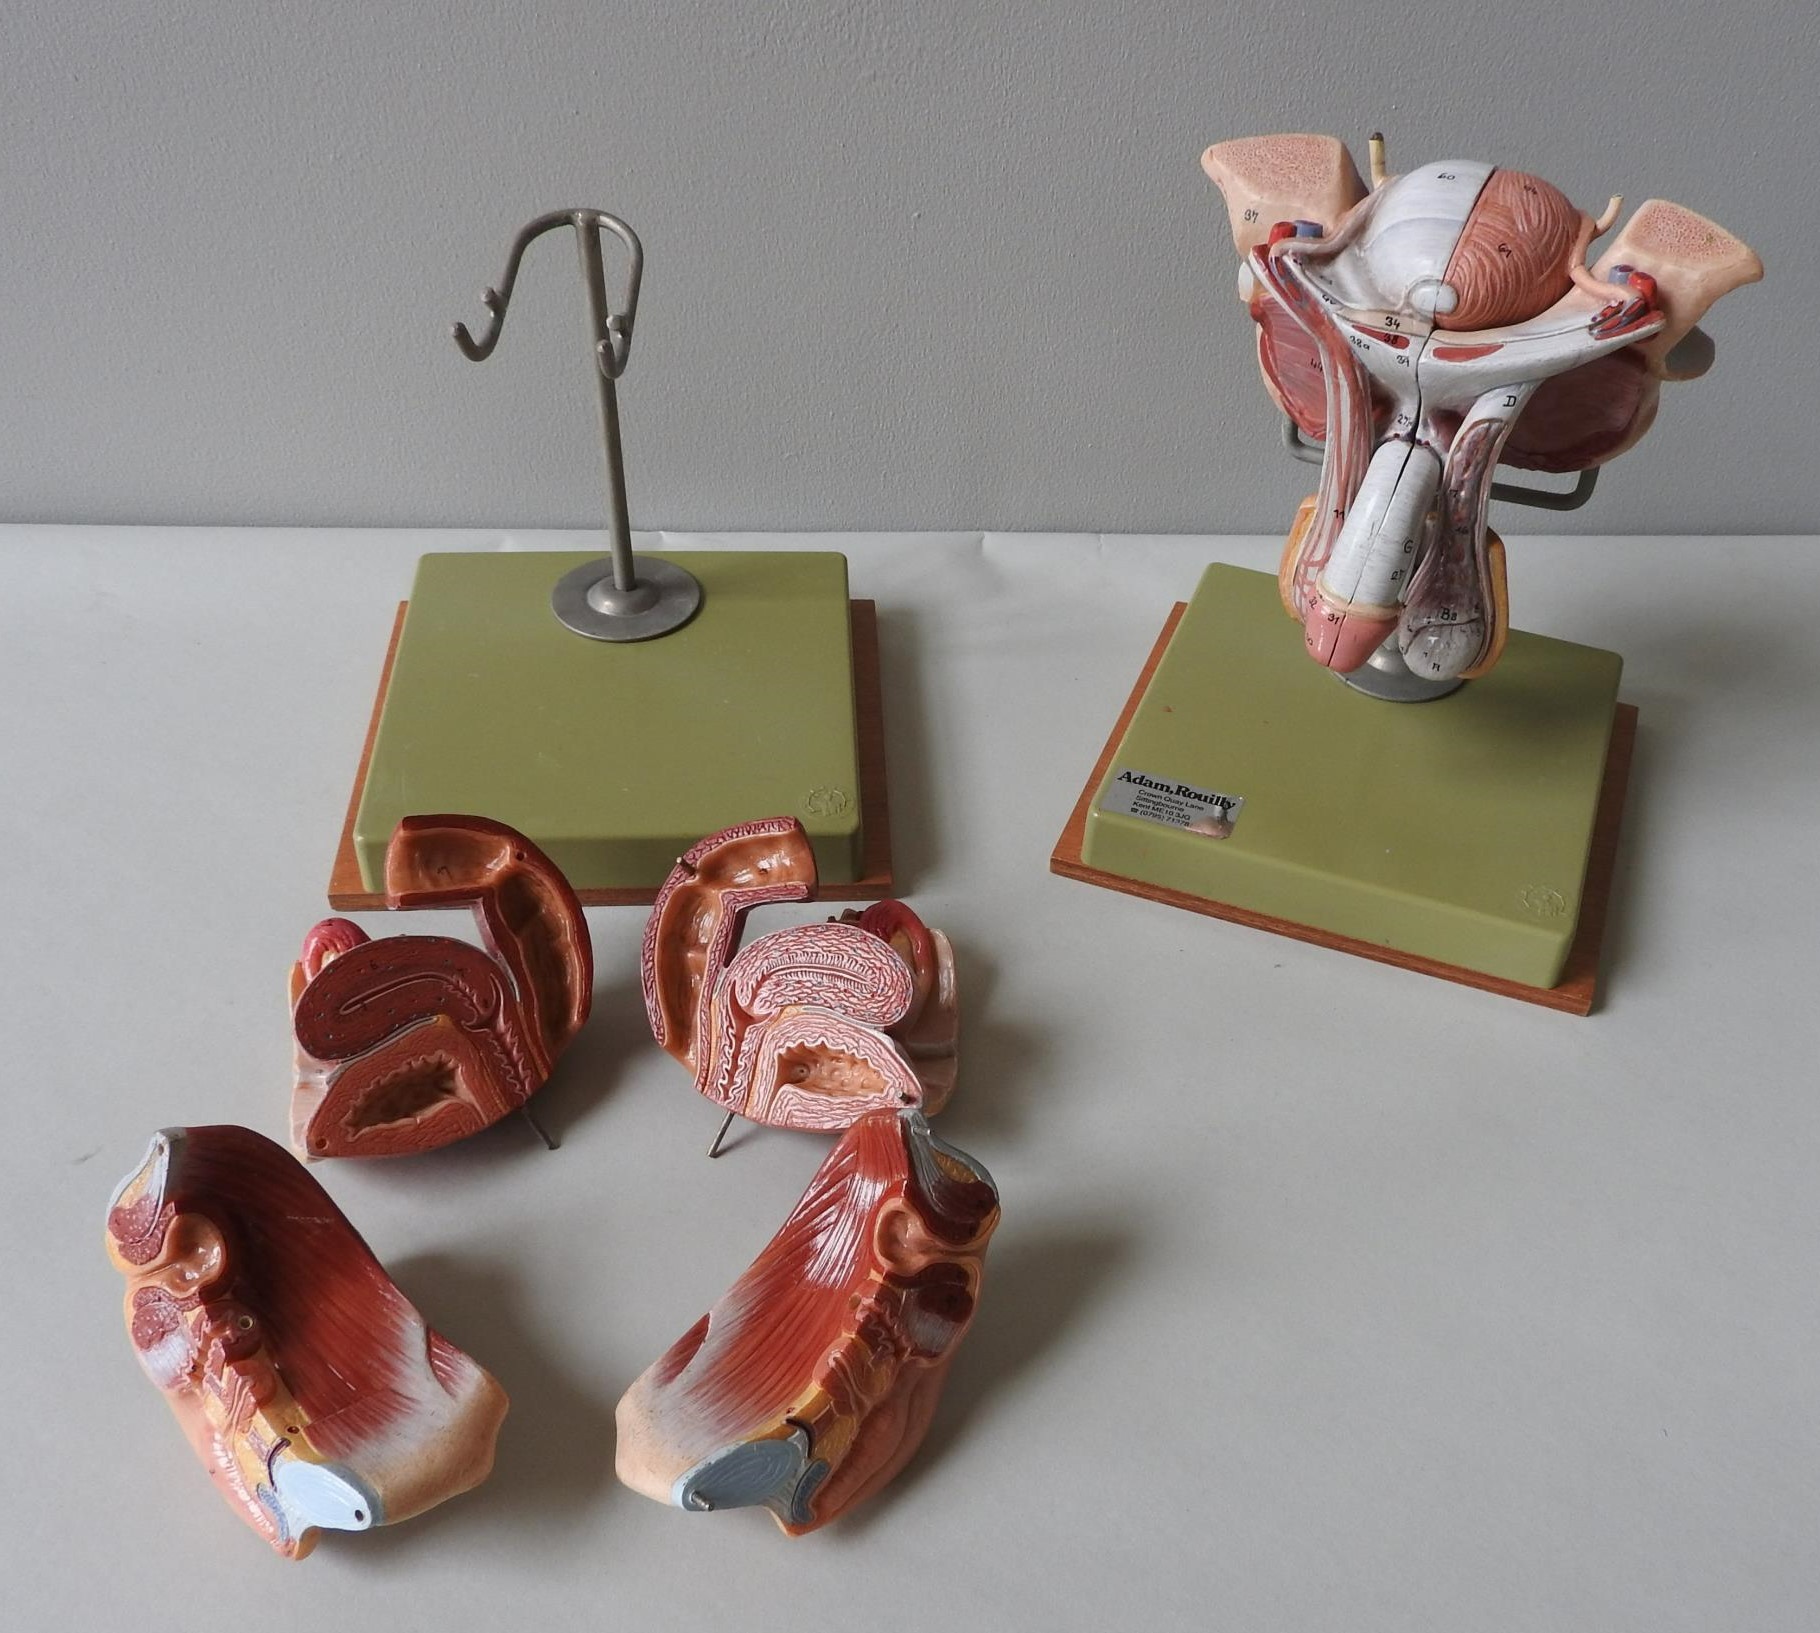 TWO VINTAGE SOMSO ANATOMY MODELS OF MALE AND FEMALE GENITALIA - Image 2 of 3